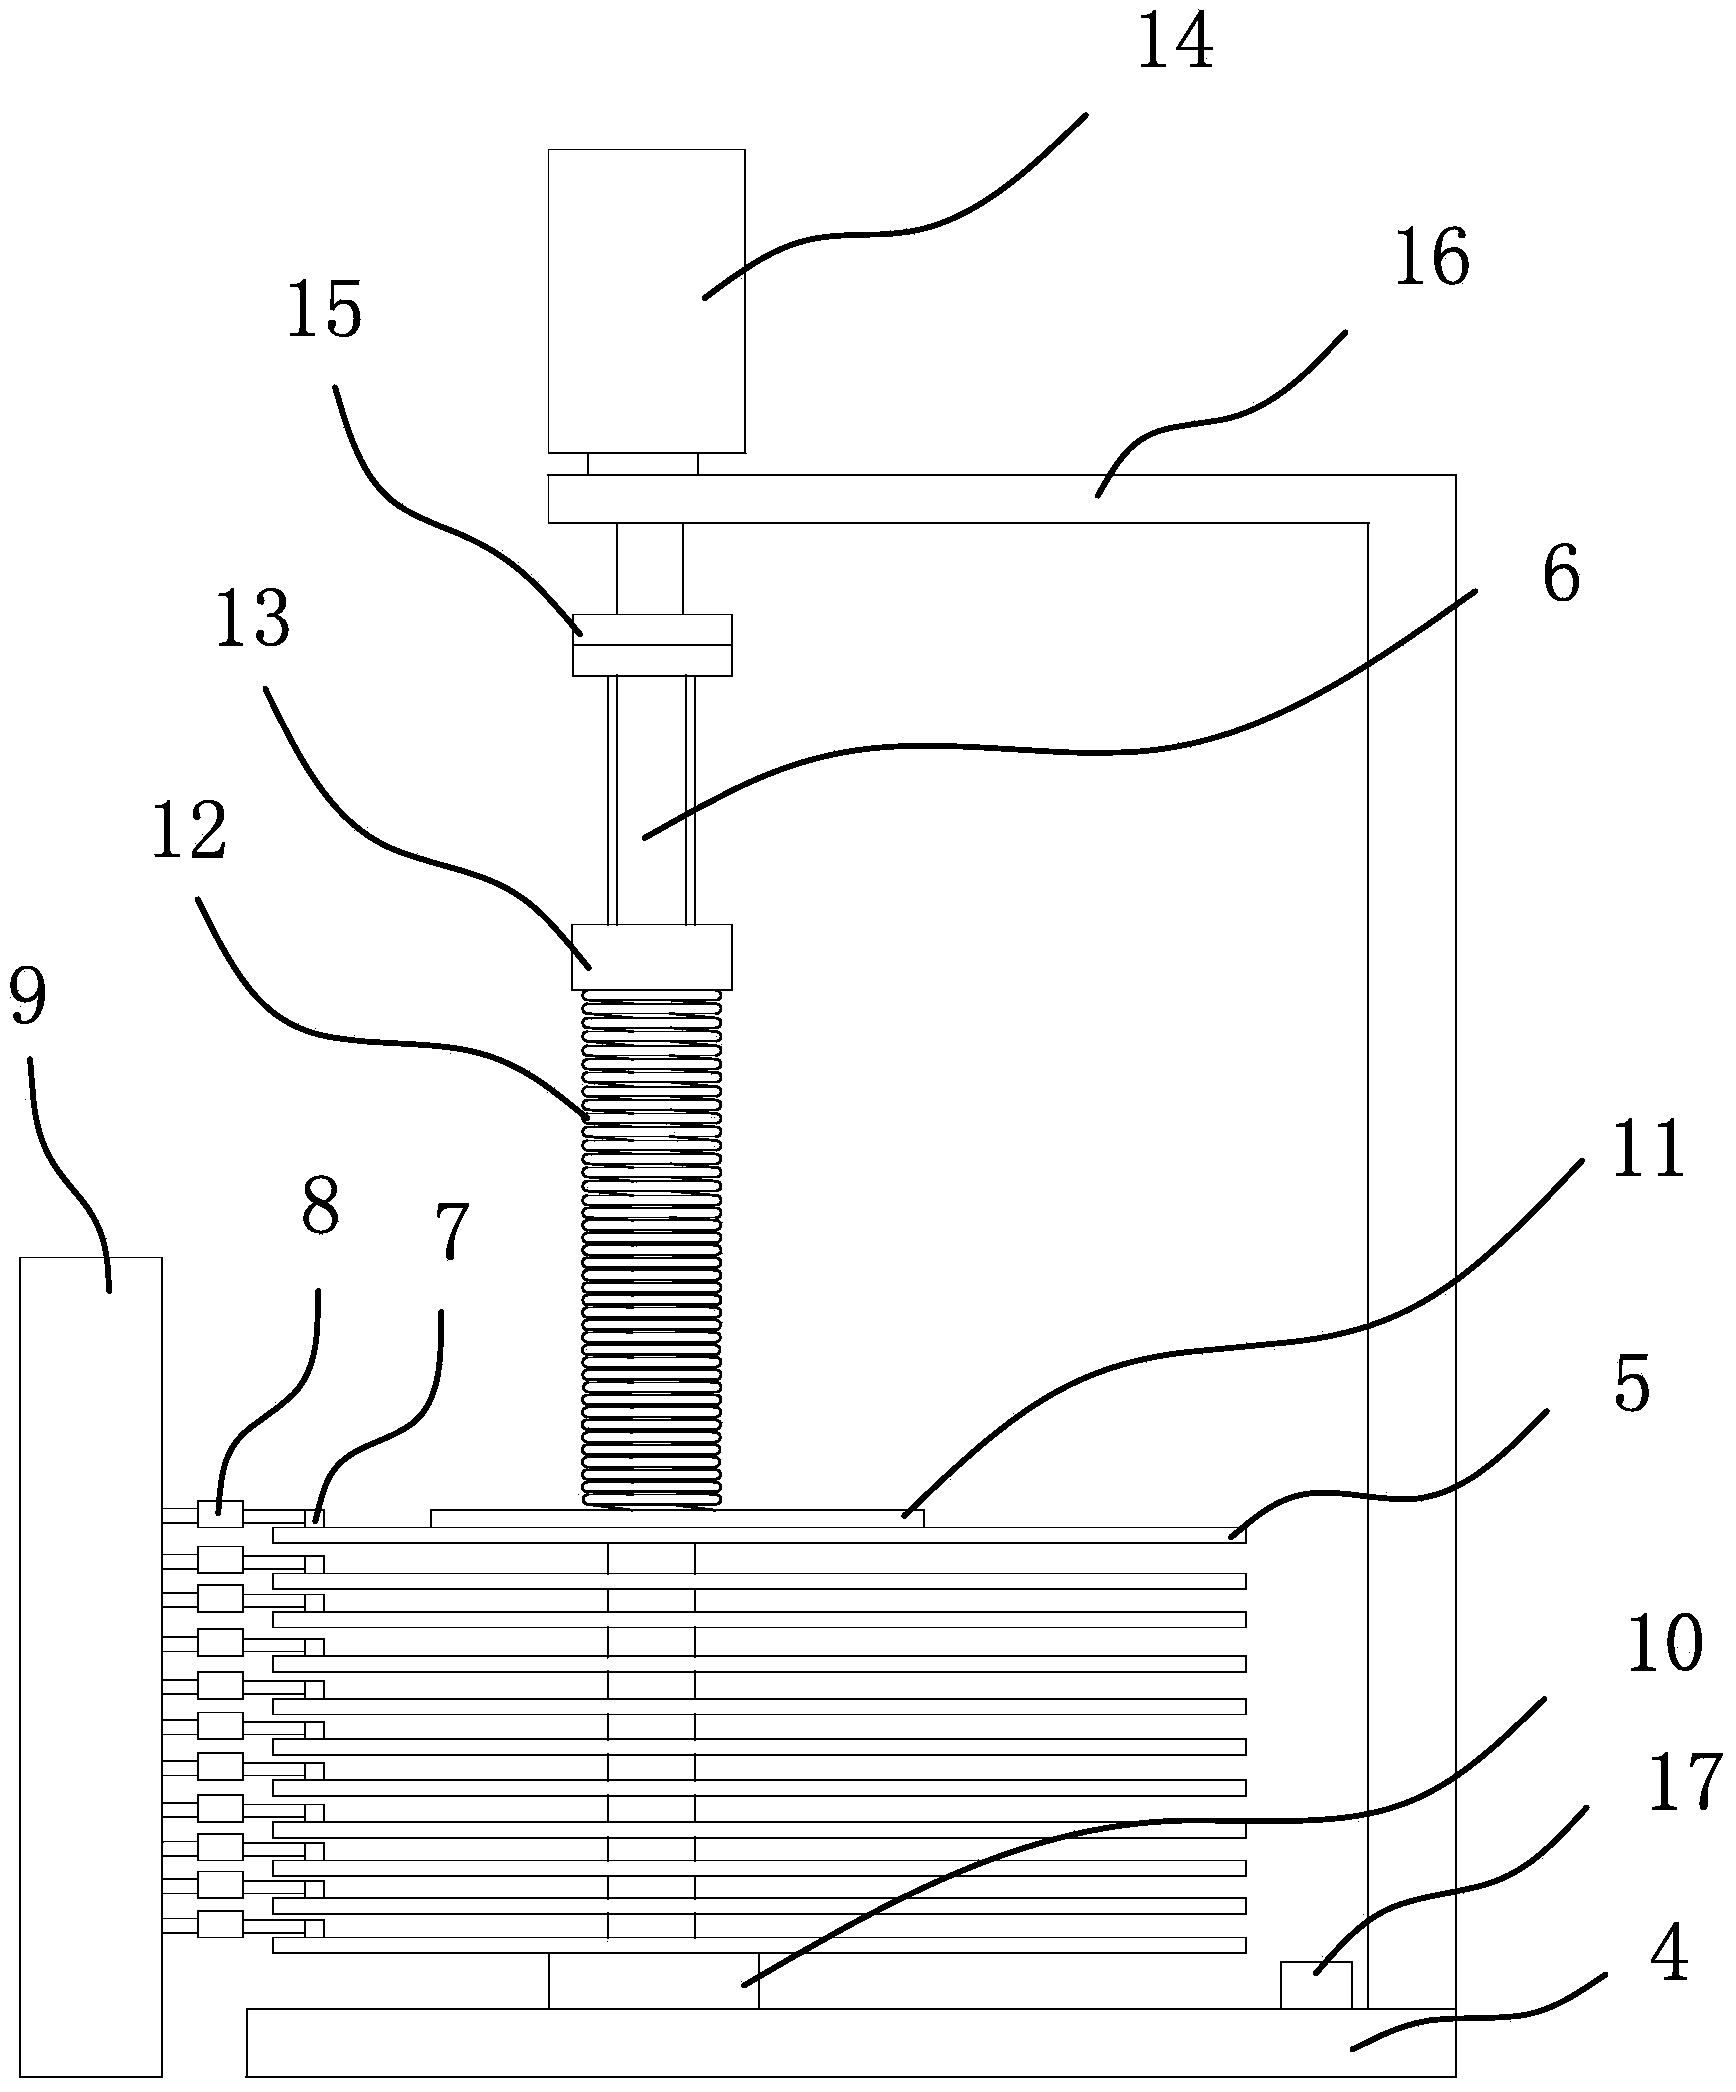 Marsh gas production system of marsh gas tank with drive mechanism